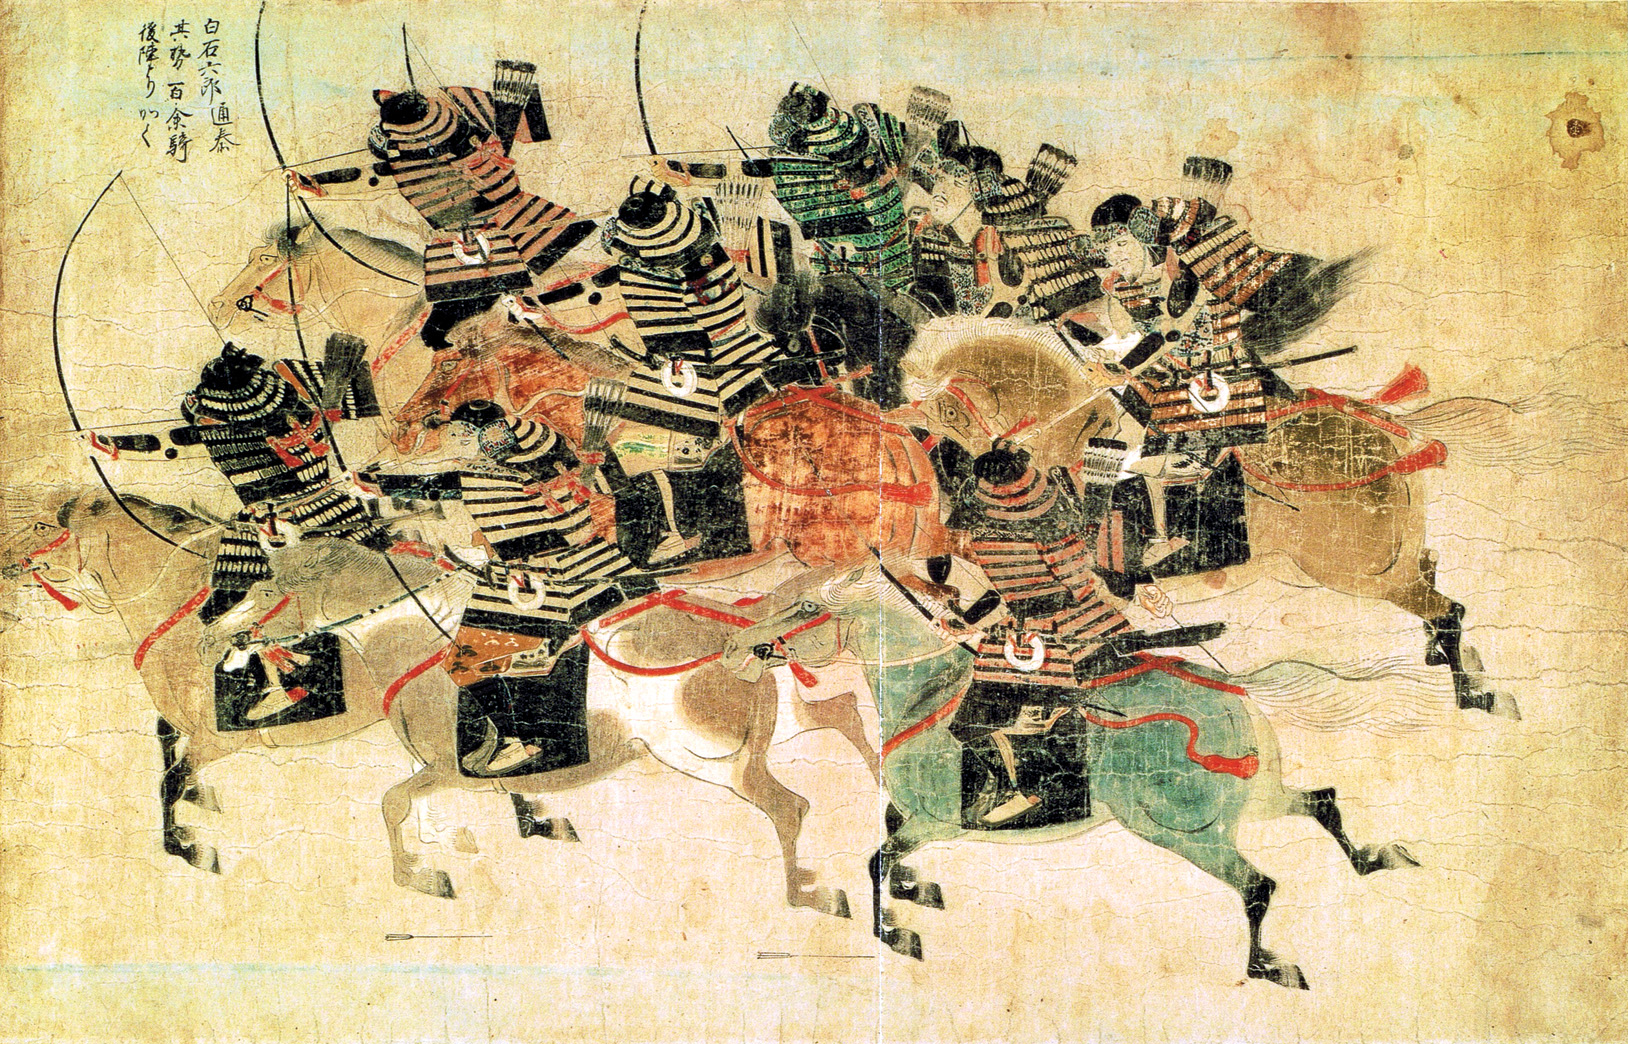 Mounted Japanese samurai advance to the attack. Thirteenth-century samurai excelled in archery but in a highly individualistic manner where they sought prestigious targets that would bring them fame and renown.